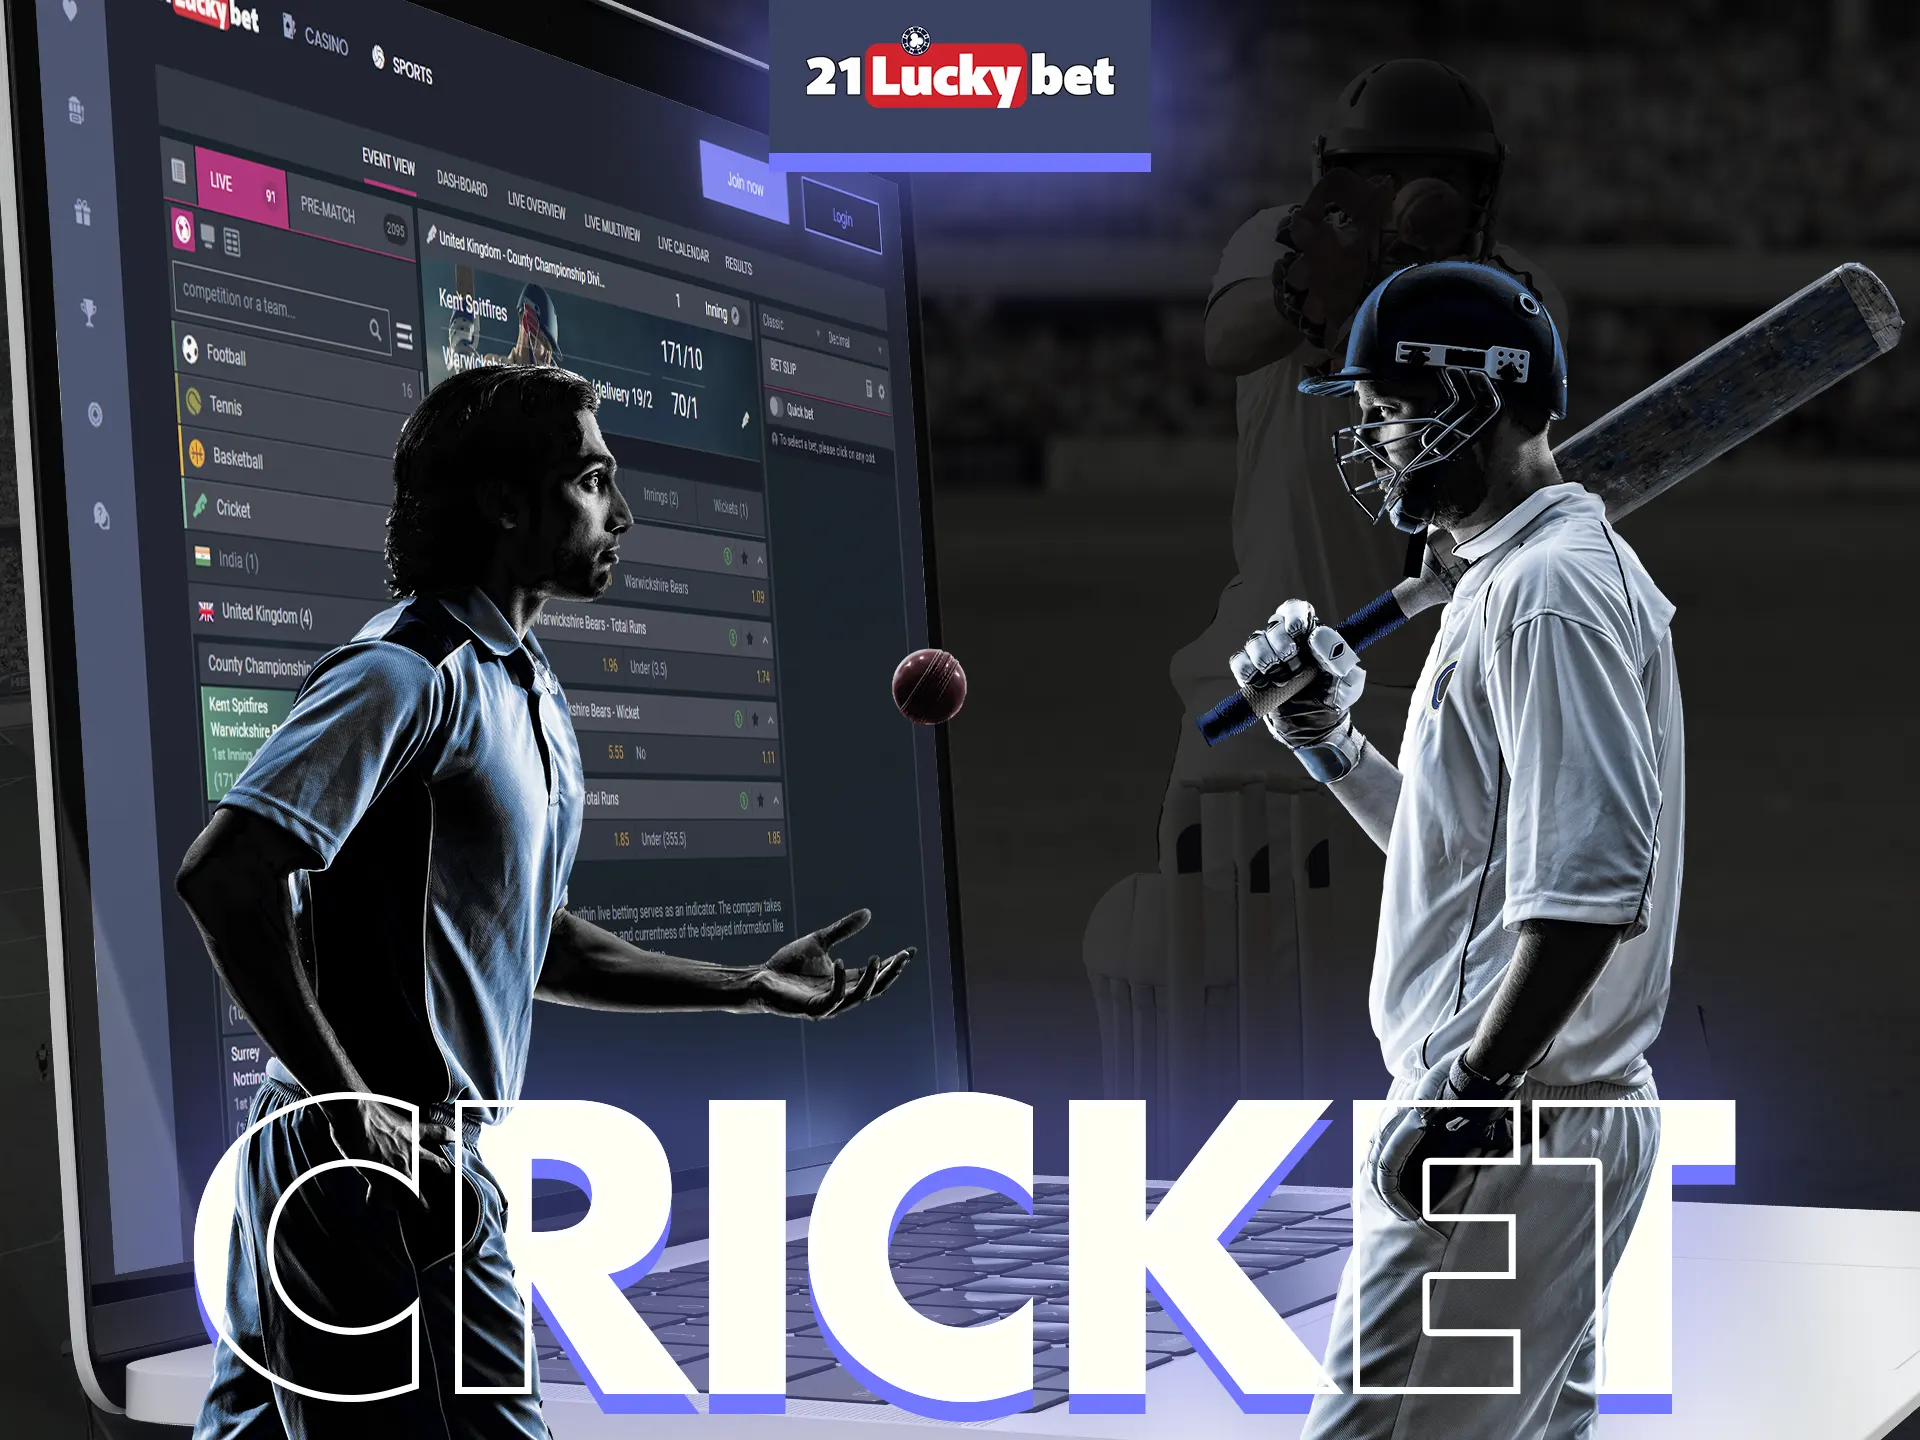 21luckybet has a cricket betting section.